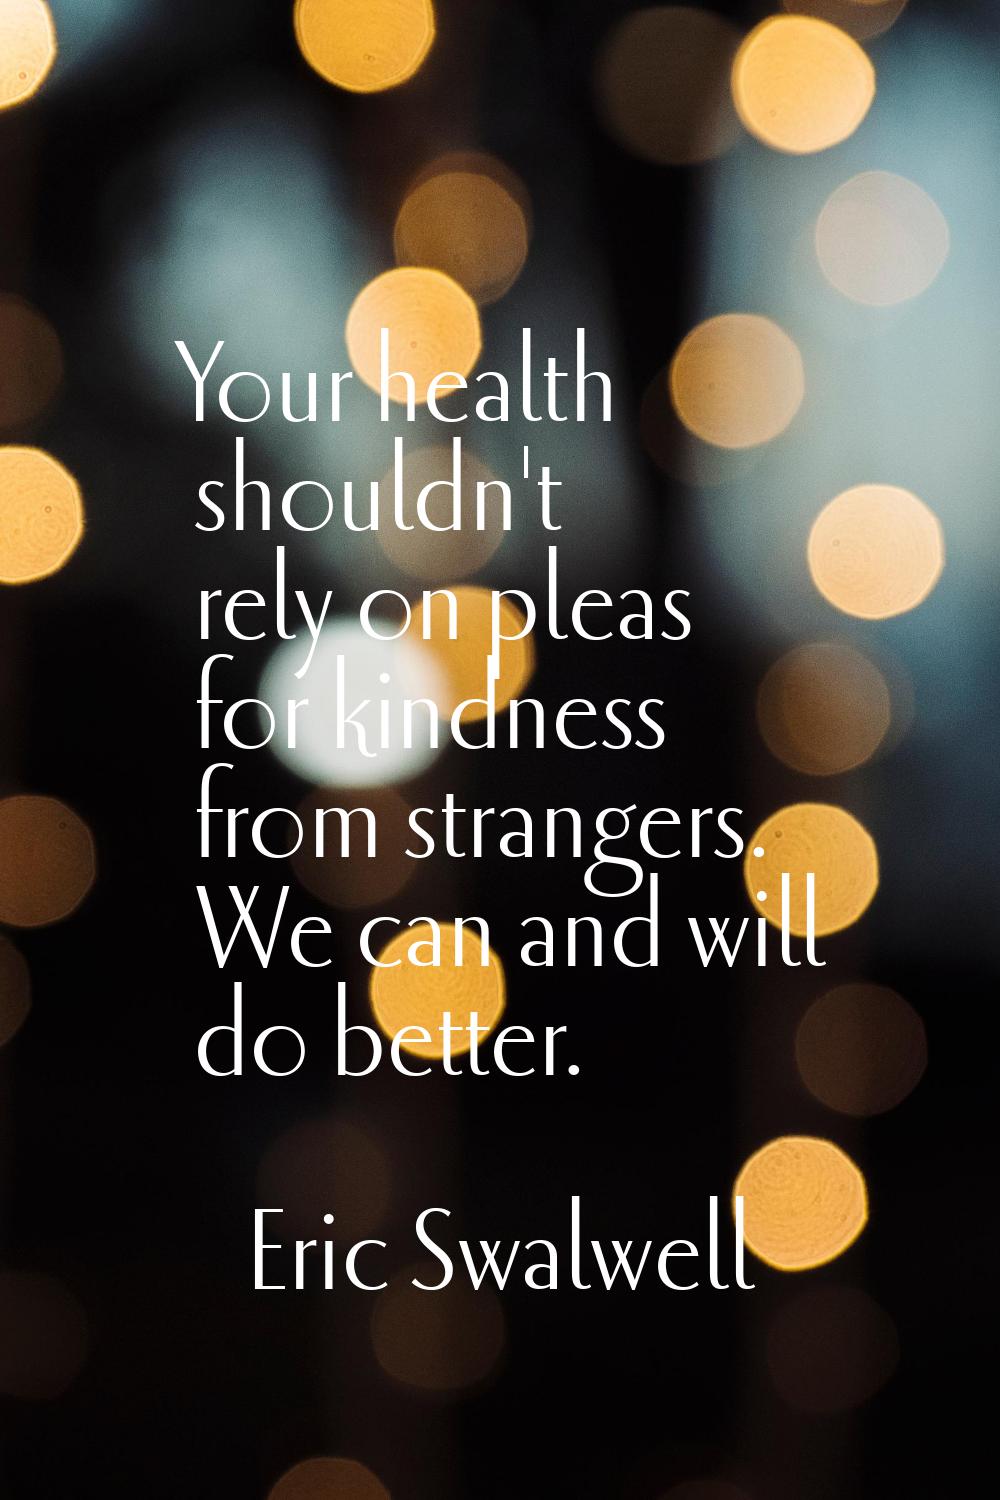 Your health shouldn't rely on pleas for kindness from strangers. We can and will do better.